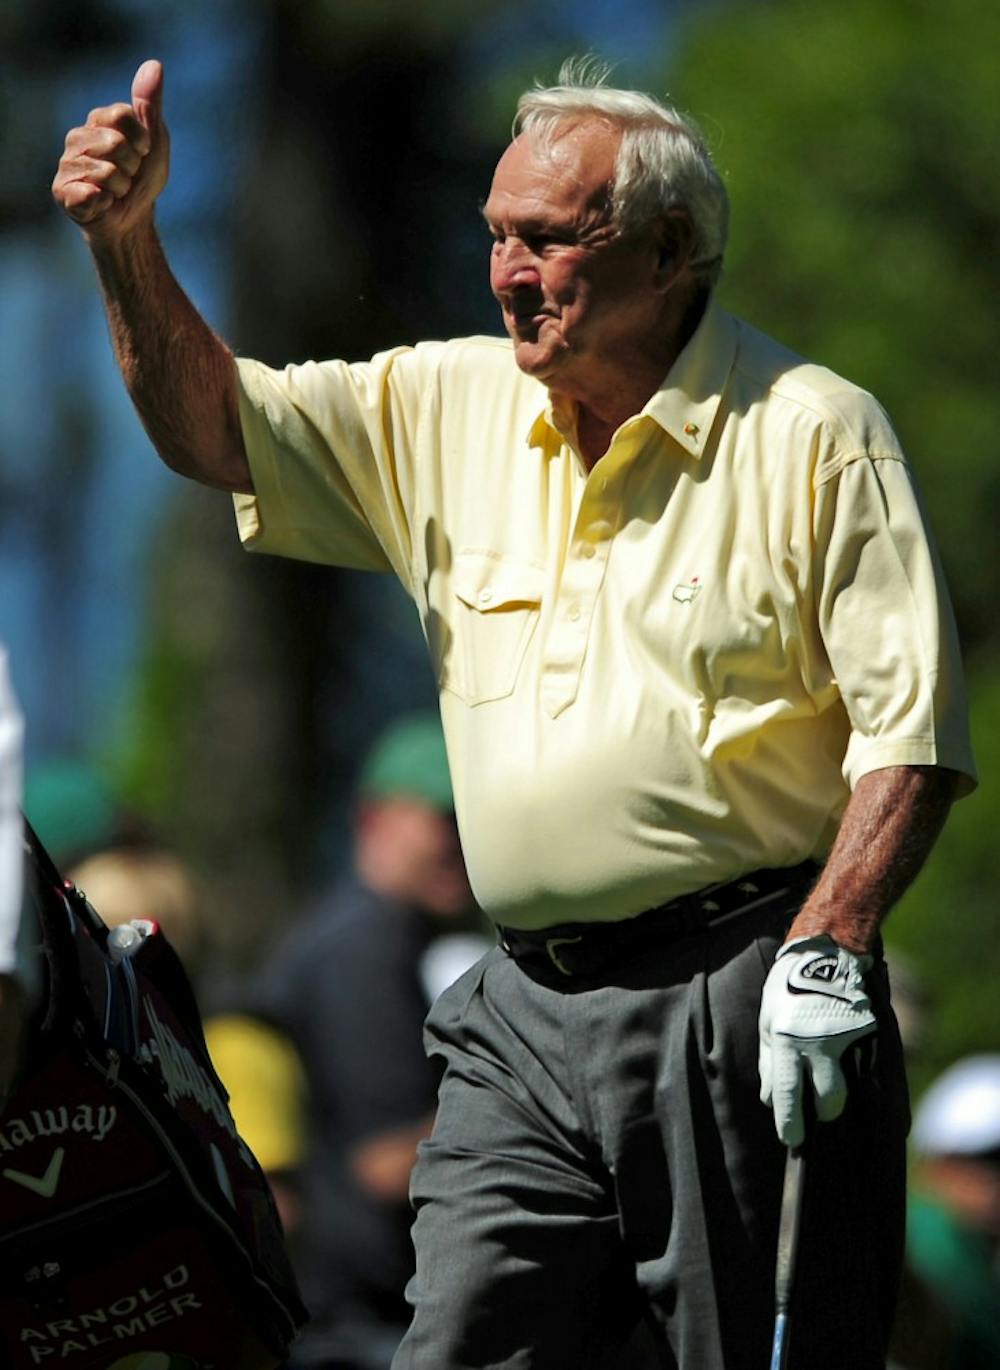 Arnold Palmer gives the thumbs up to the fans as they applaud his pairing that included Gary Player and Jack Nicklaus during the Par 3 Contest prior to The Masters at Augusta National Golf Club, on Wednesday, April 6, 2011, in Augusta, Georgia. (Jeff Siner/Charlotte Observer/MCT)